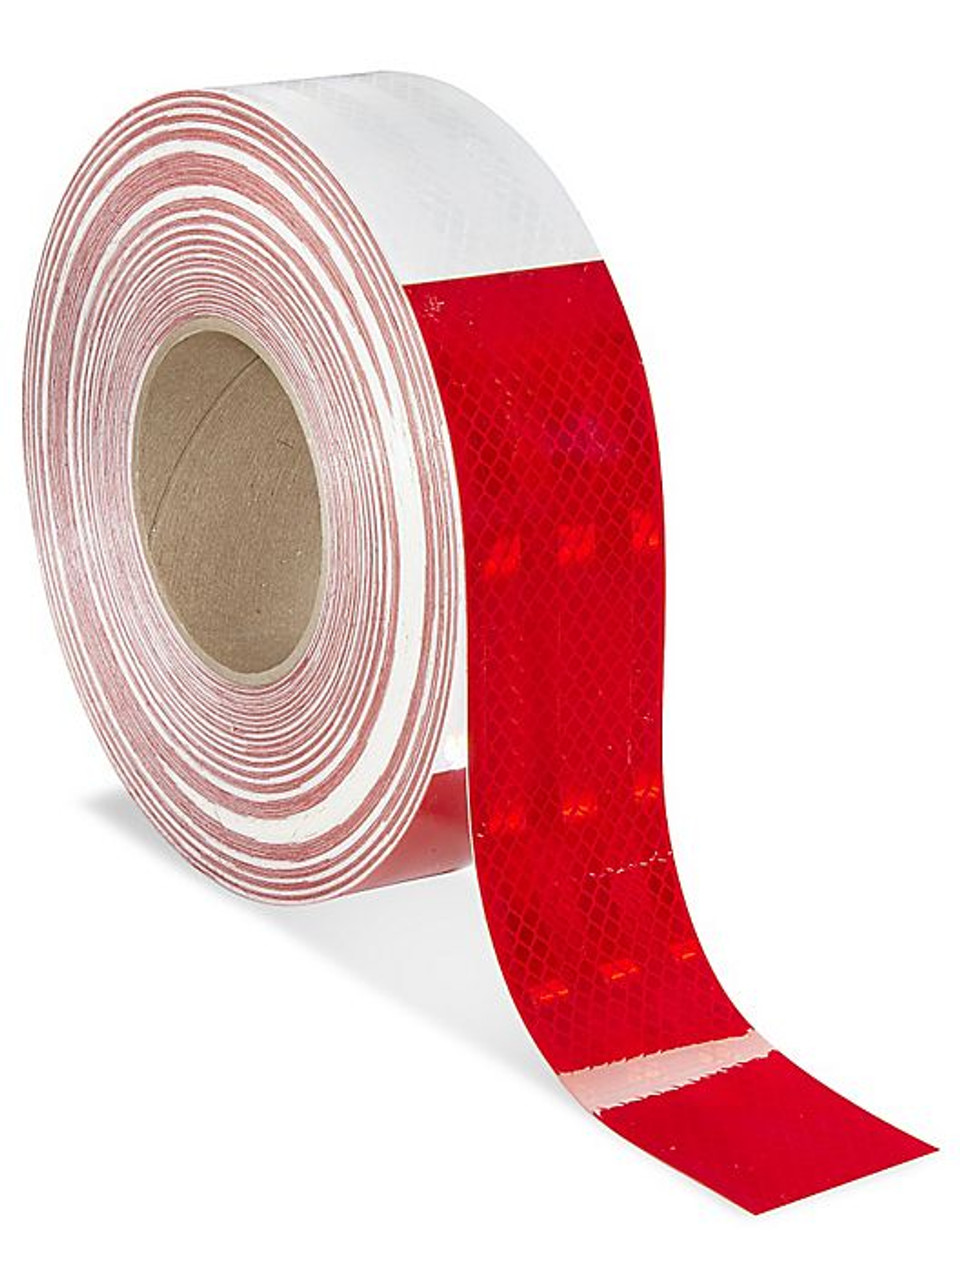 3M Conspicuity Tape | Red and White Reflective Tape DOT approved from ...